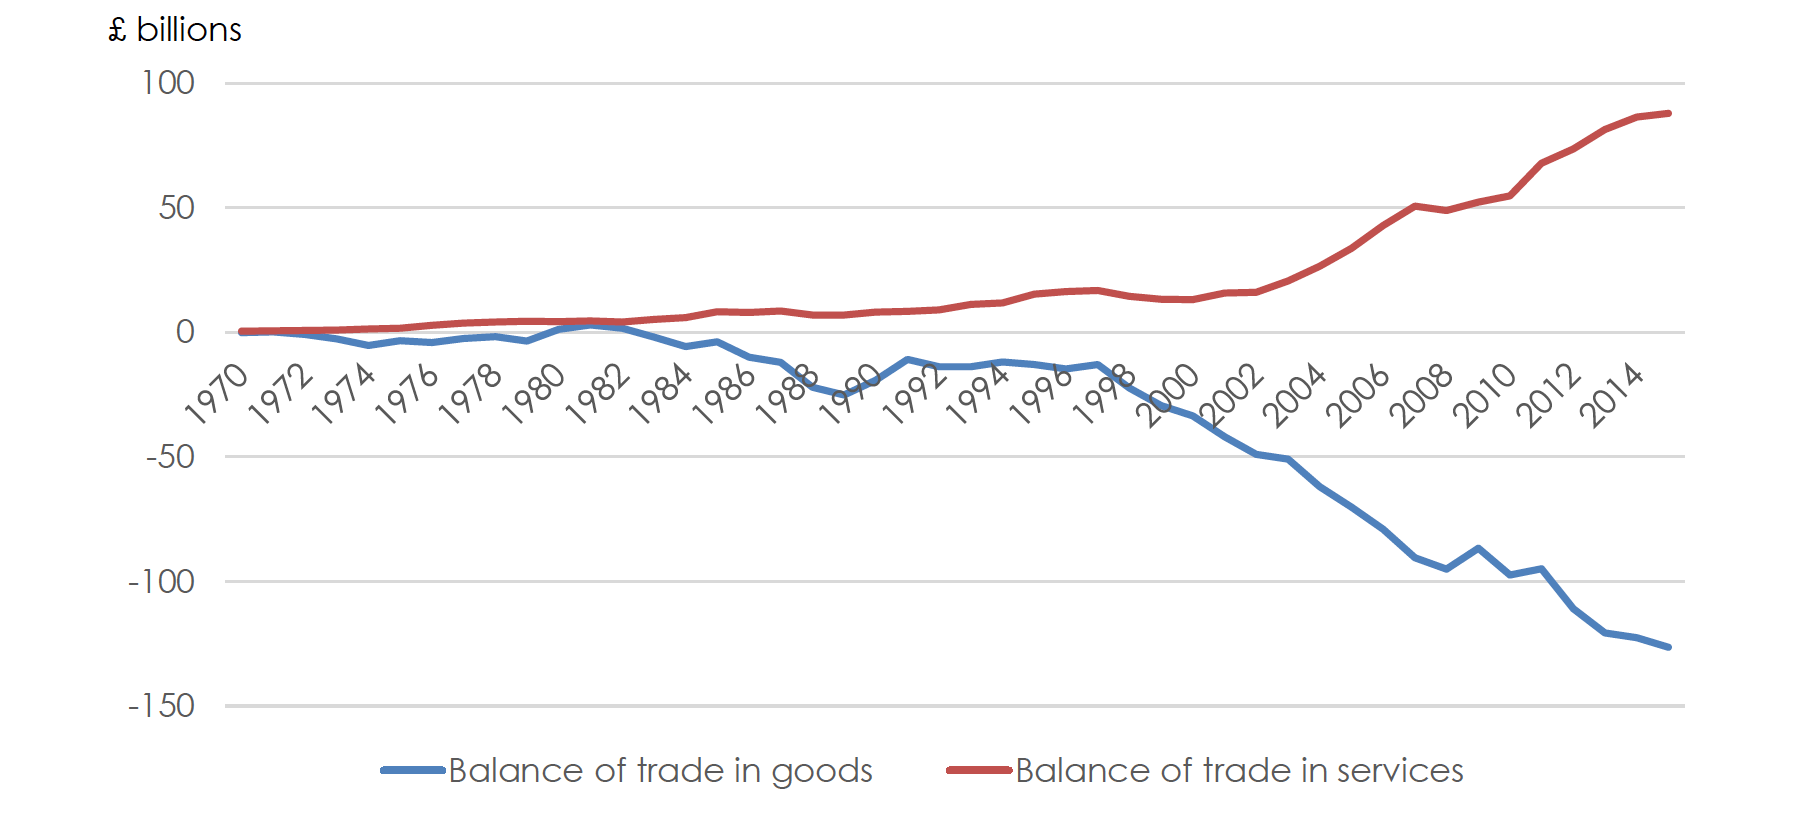 uk-balance-of-trade-in-goods-and-services.png